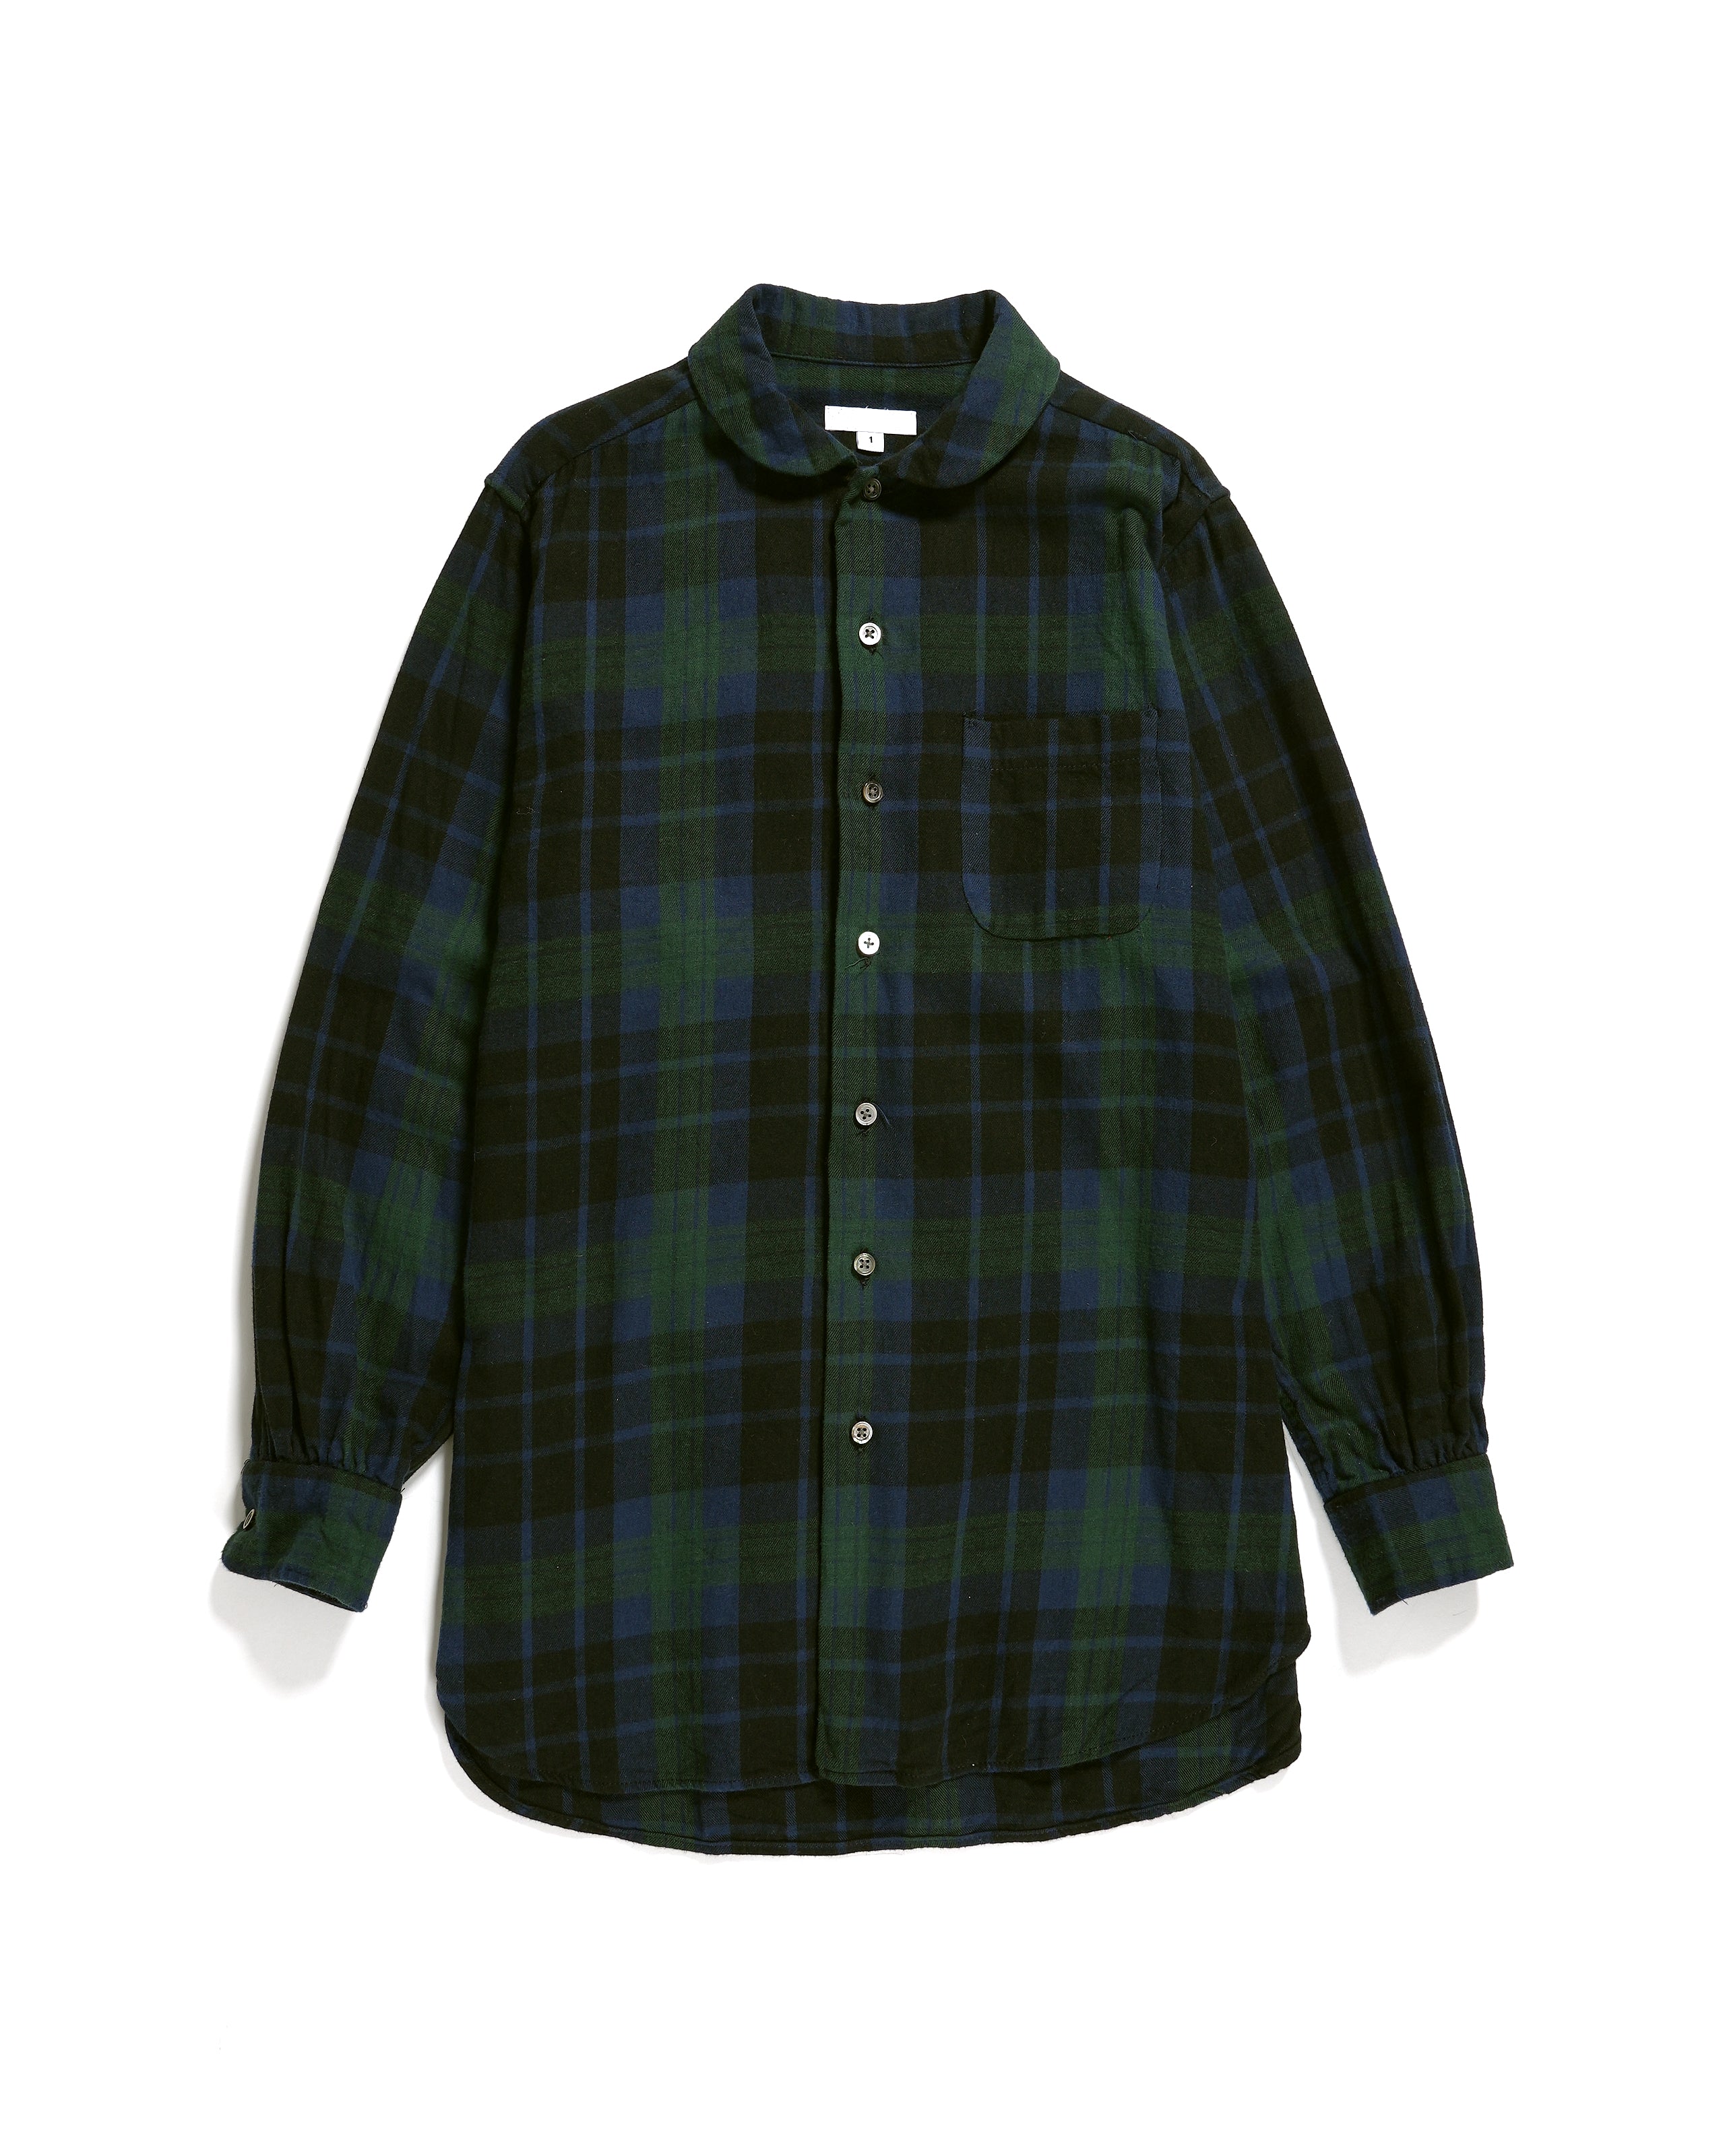 Engineered Garments Rounded Collar Shirt - Blackwatch Cotton Flannel